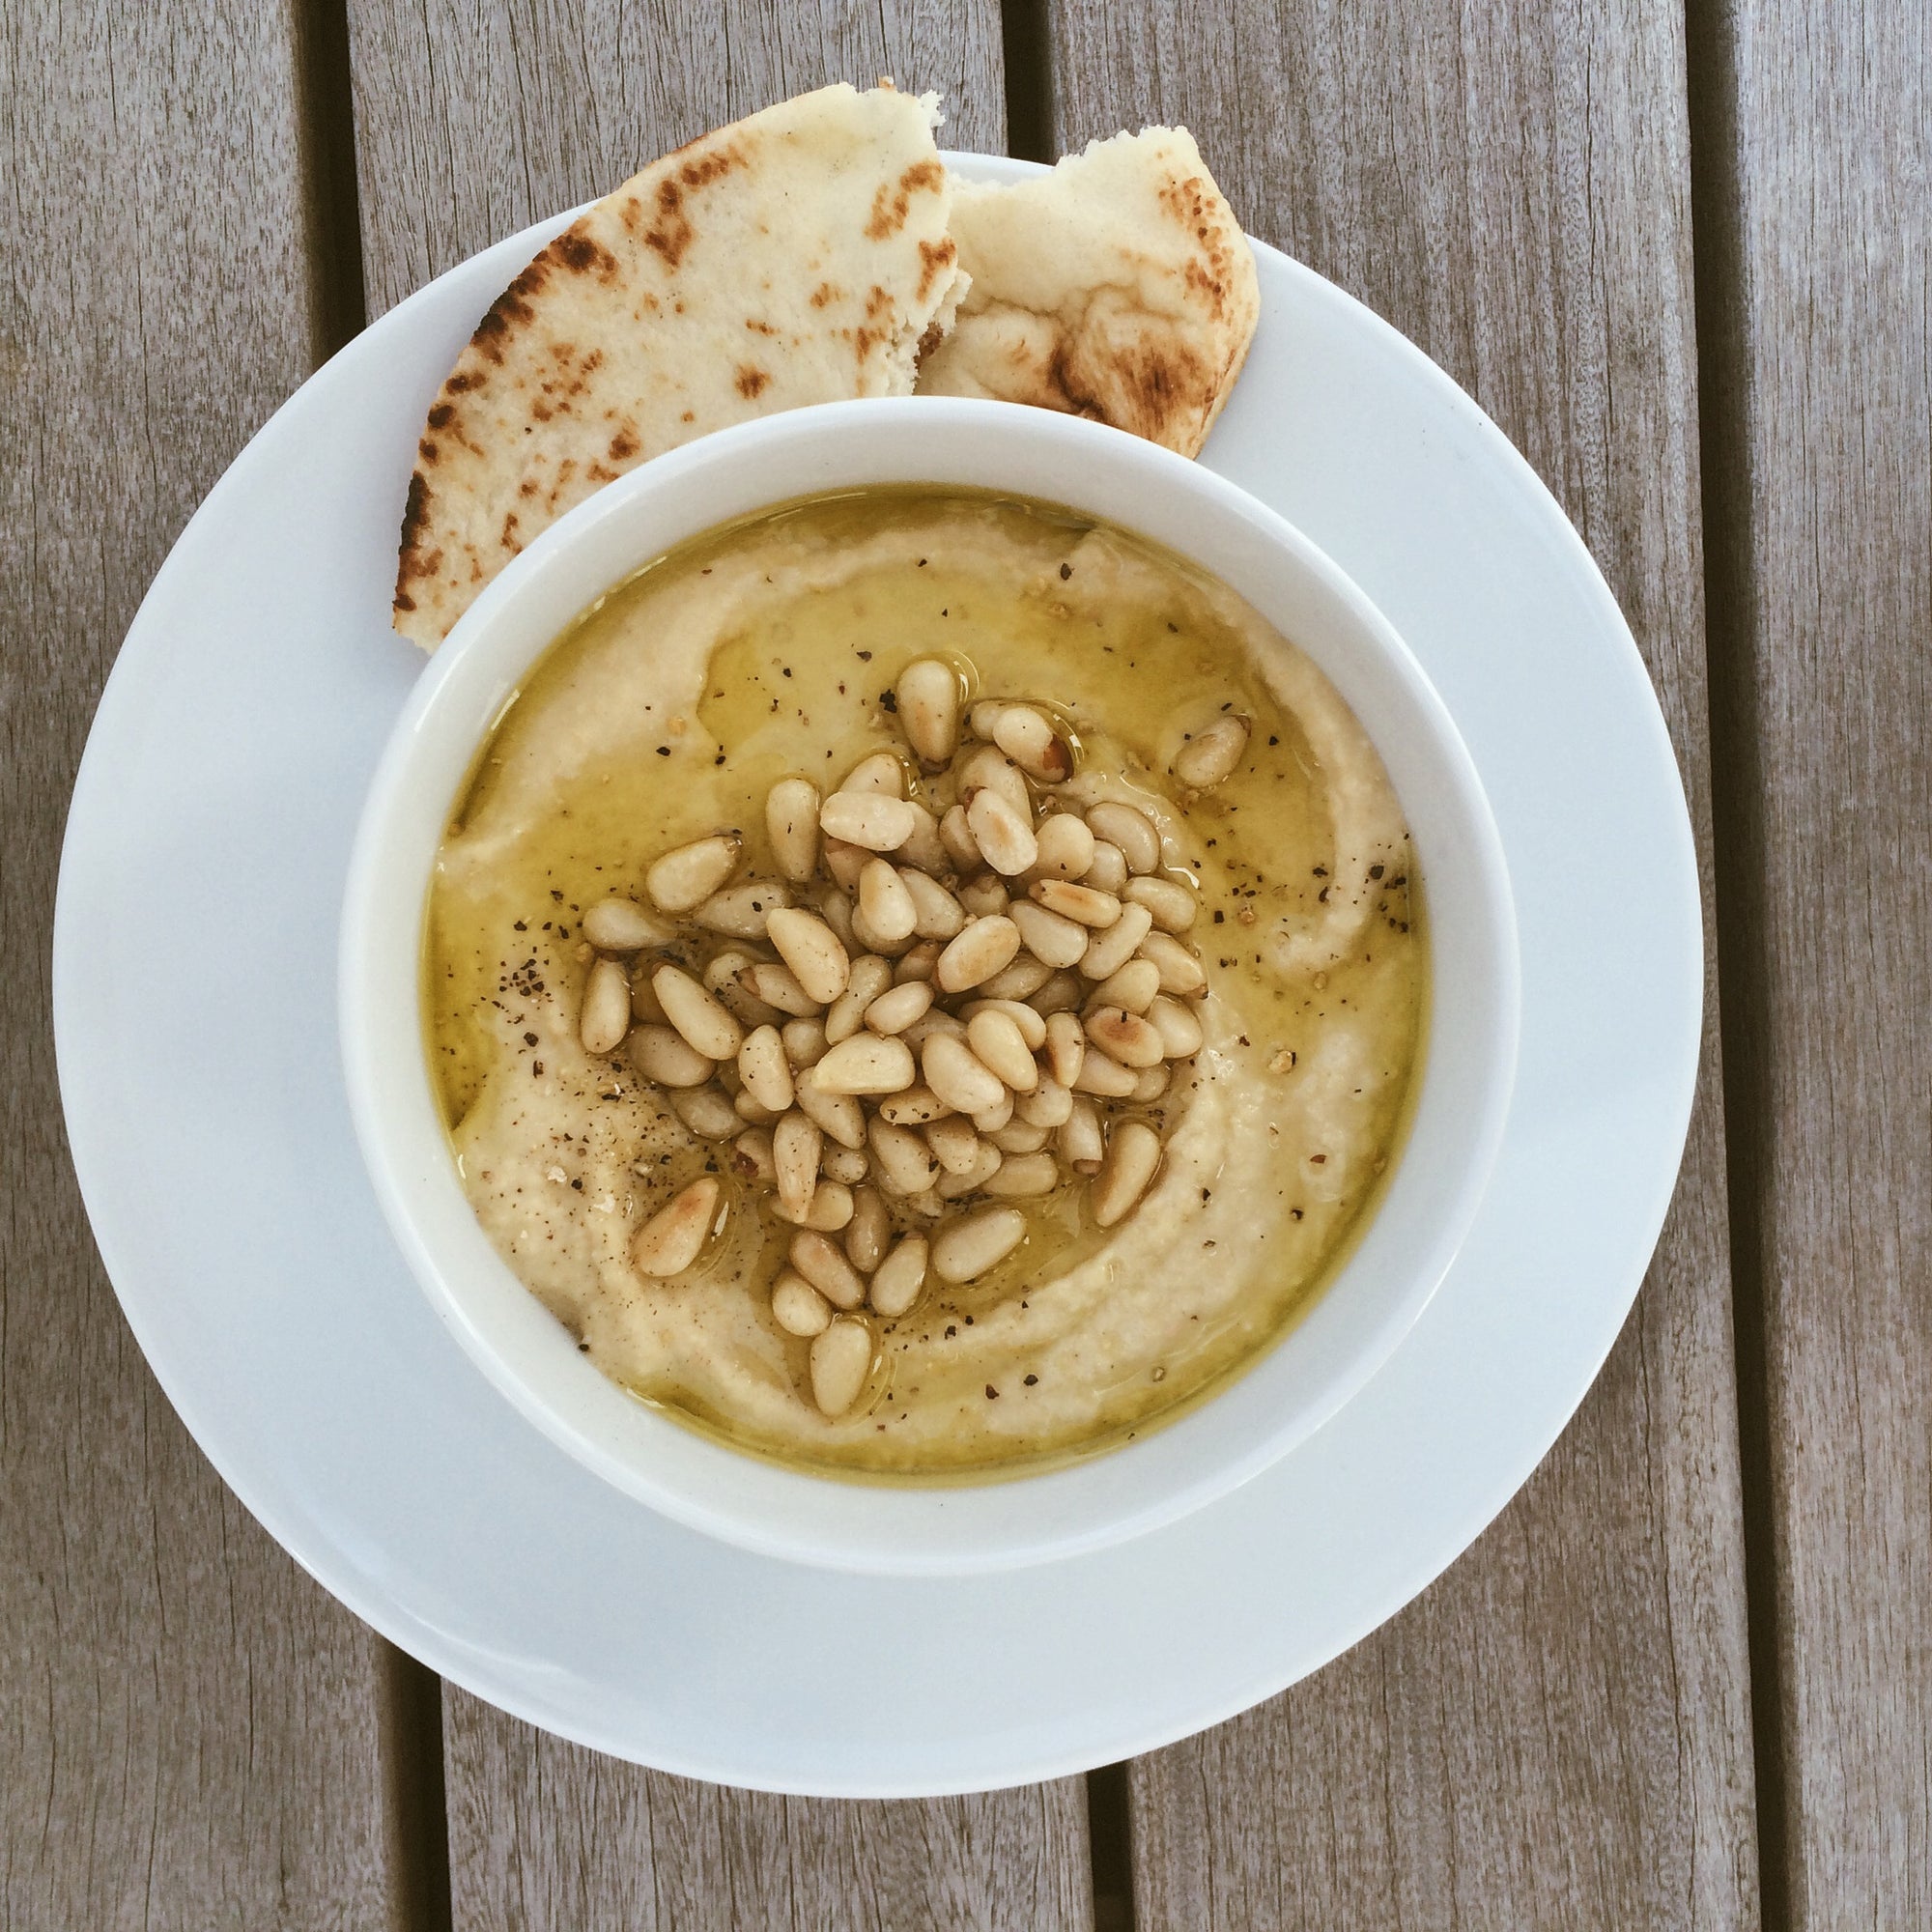 Classic Hummus With Roasted Pine Nuts (Recipe)